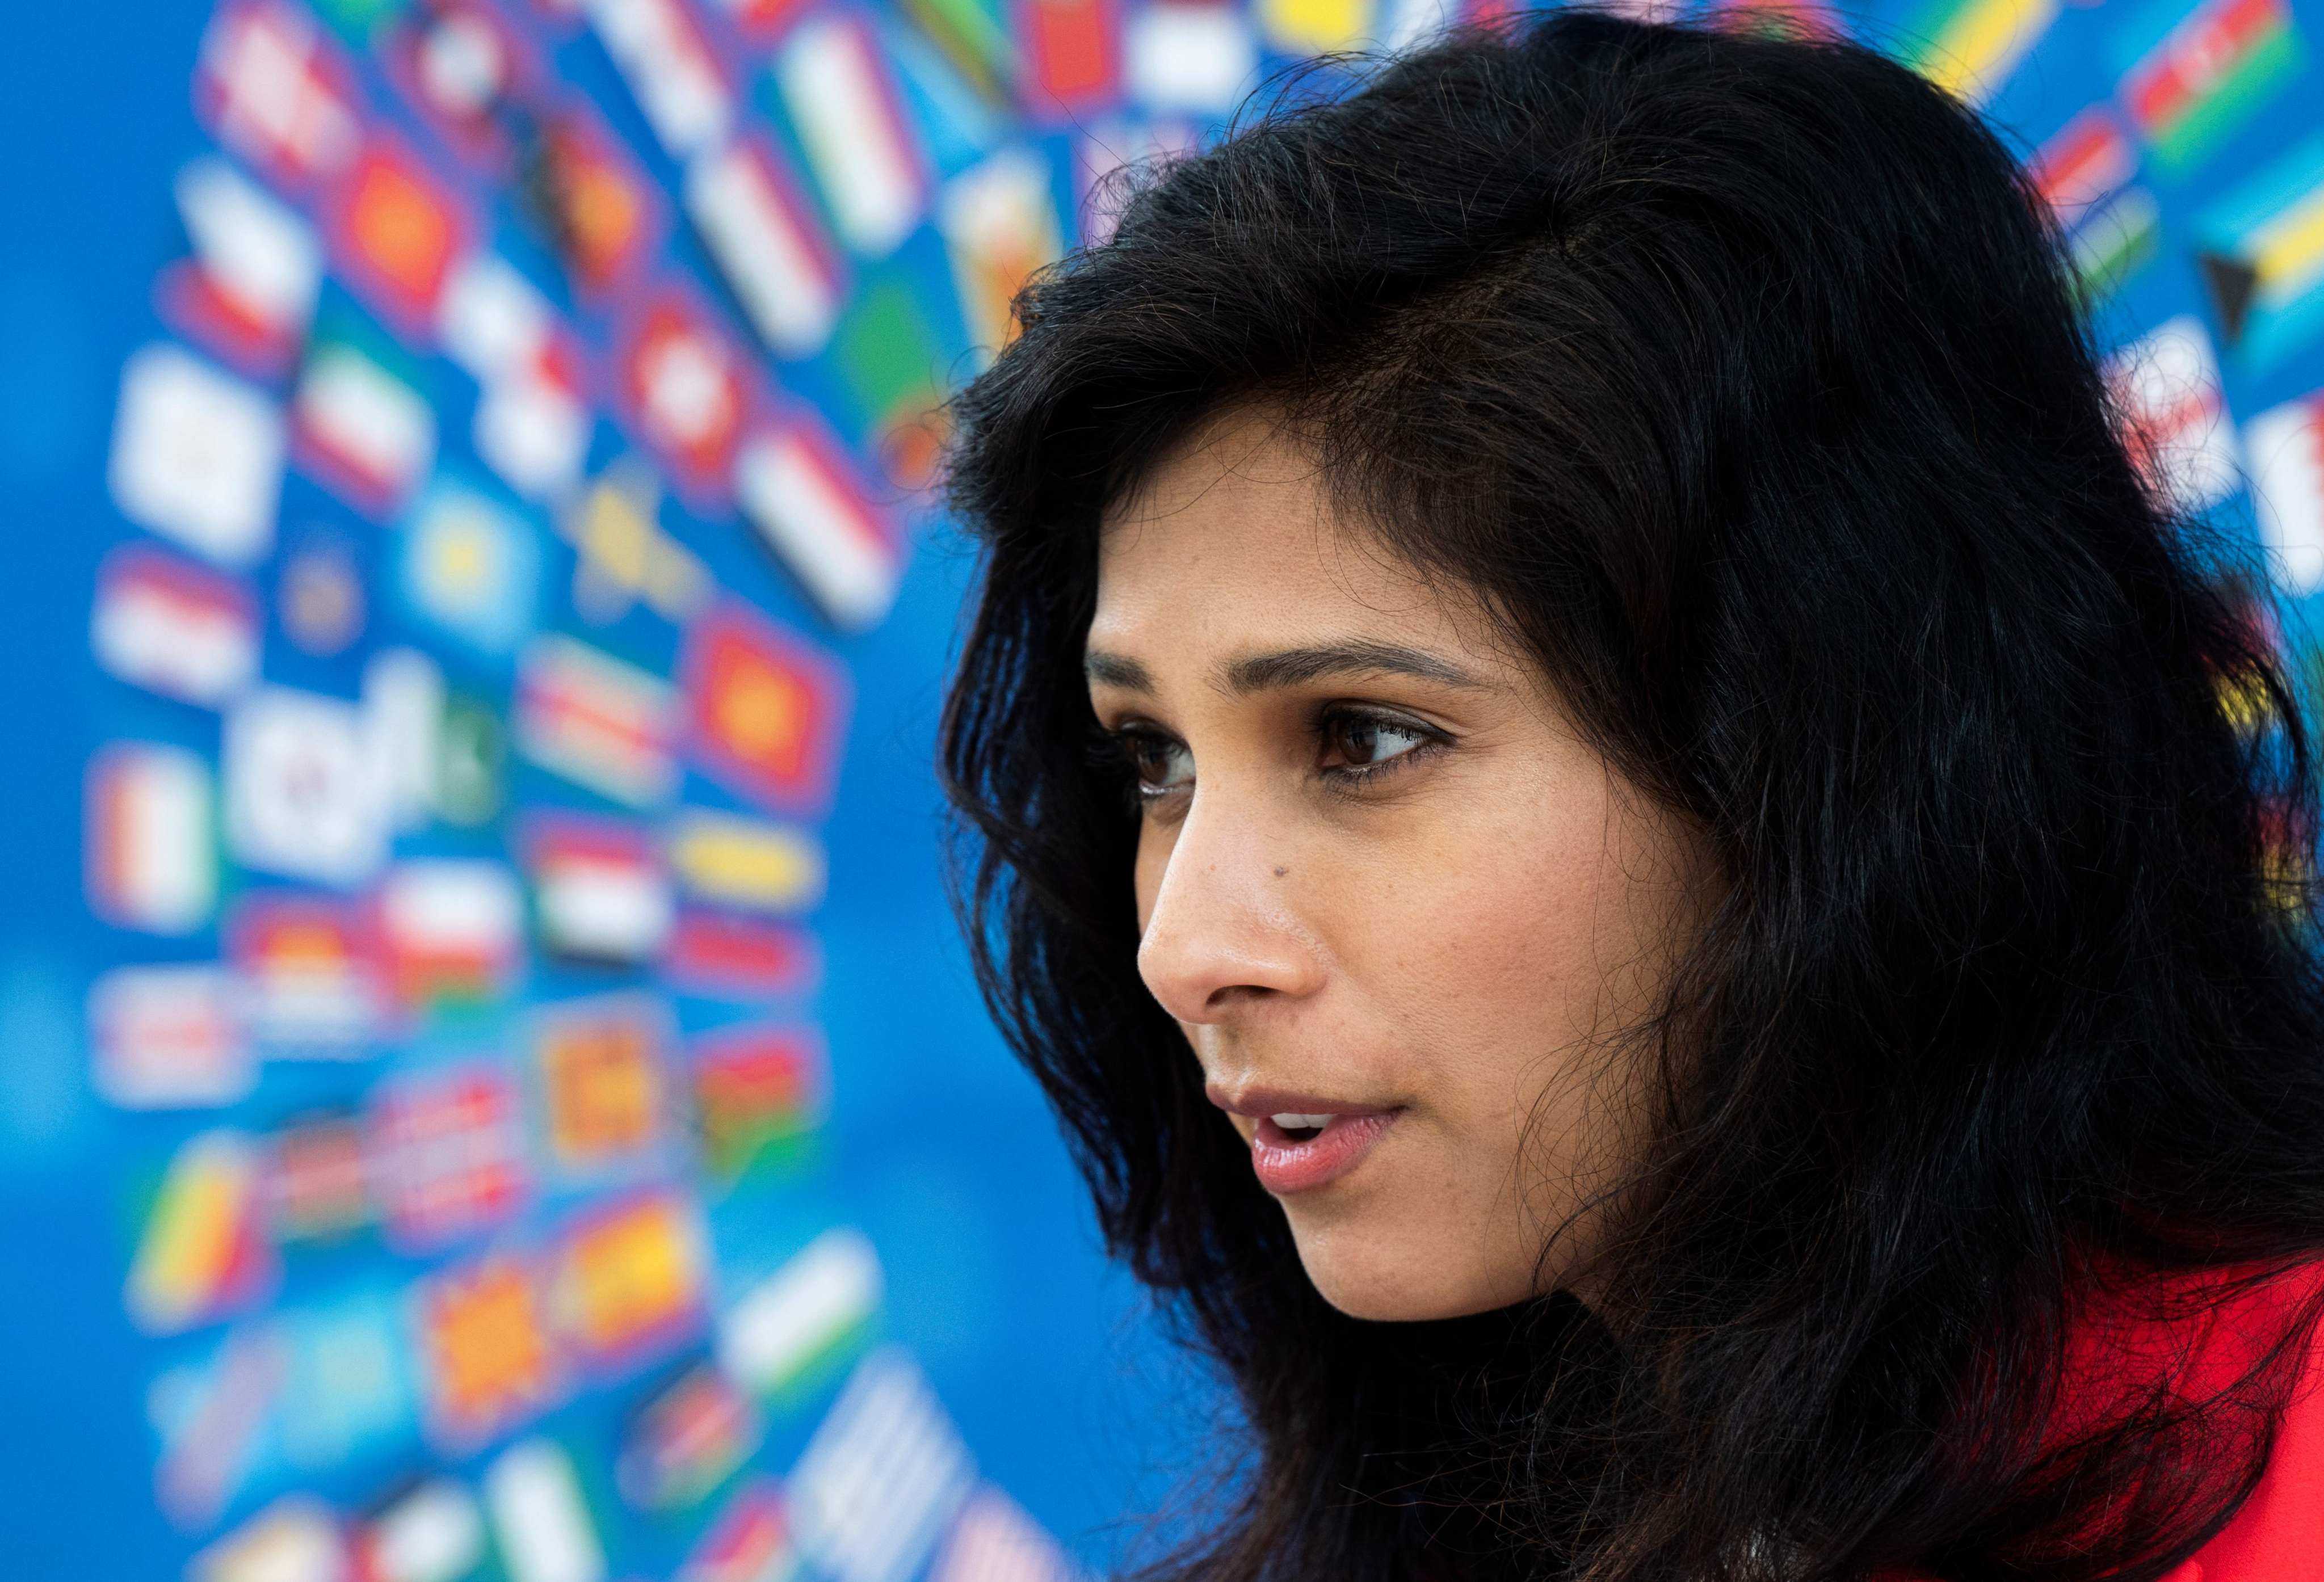 Gita Gopinath, first deputy managing director of the International Monetary Fund, speaks outside the institution’s headquarters in Washington, DC, on October 13, 2020. International organisations have exhibited nuanced differences in their statements on the war in Ukraine. The IMF vowed to support Ukraine on the financing and policy fronts. Photo: AFP